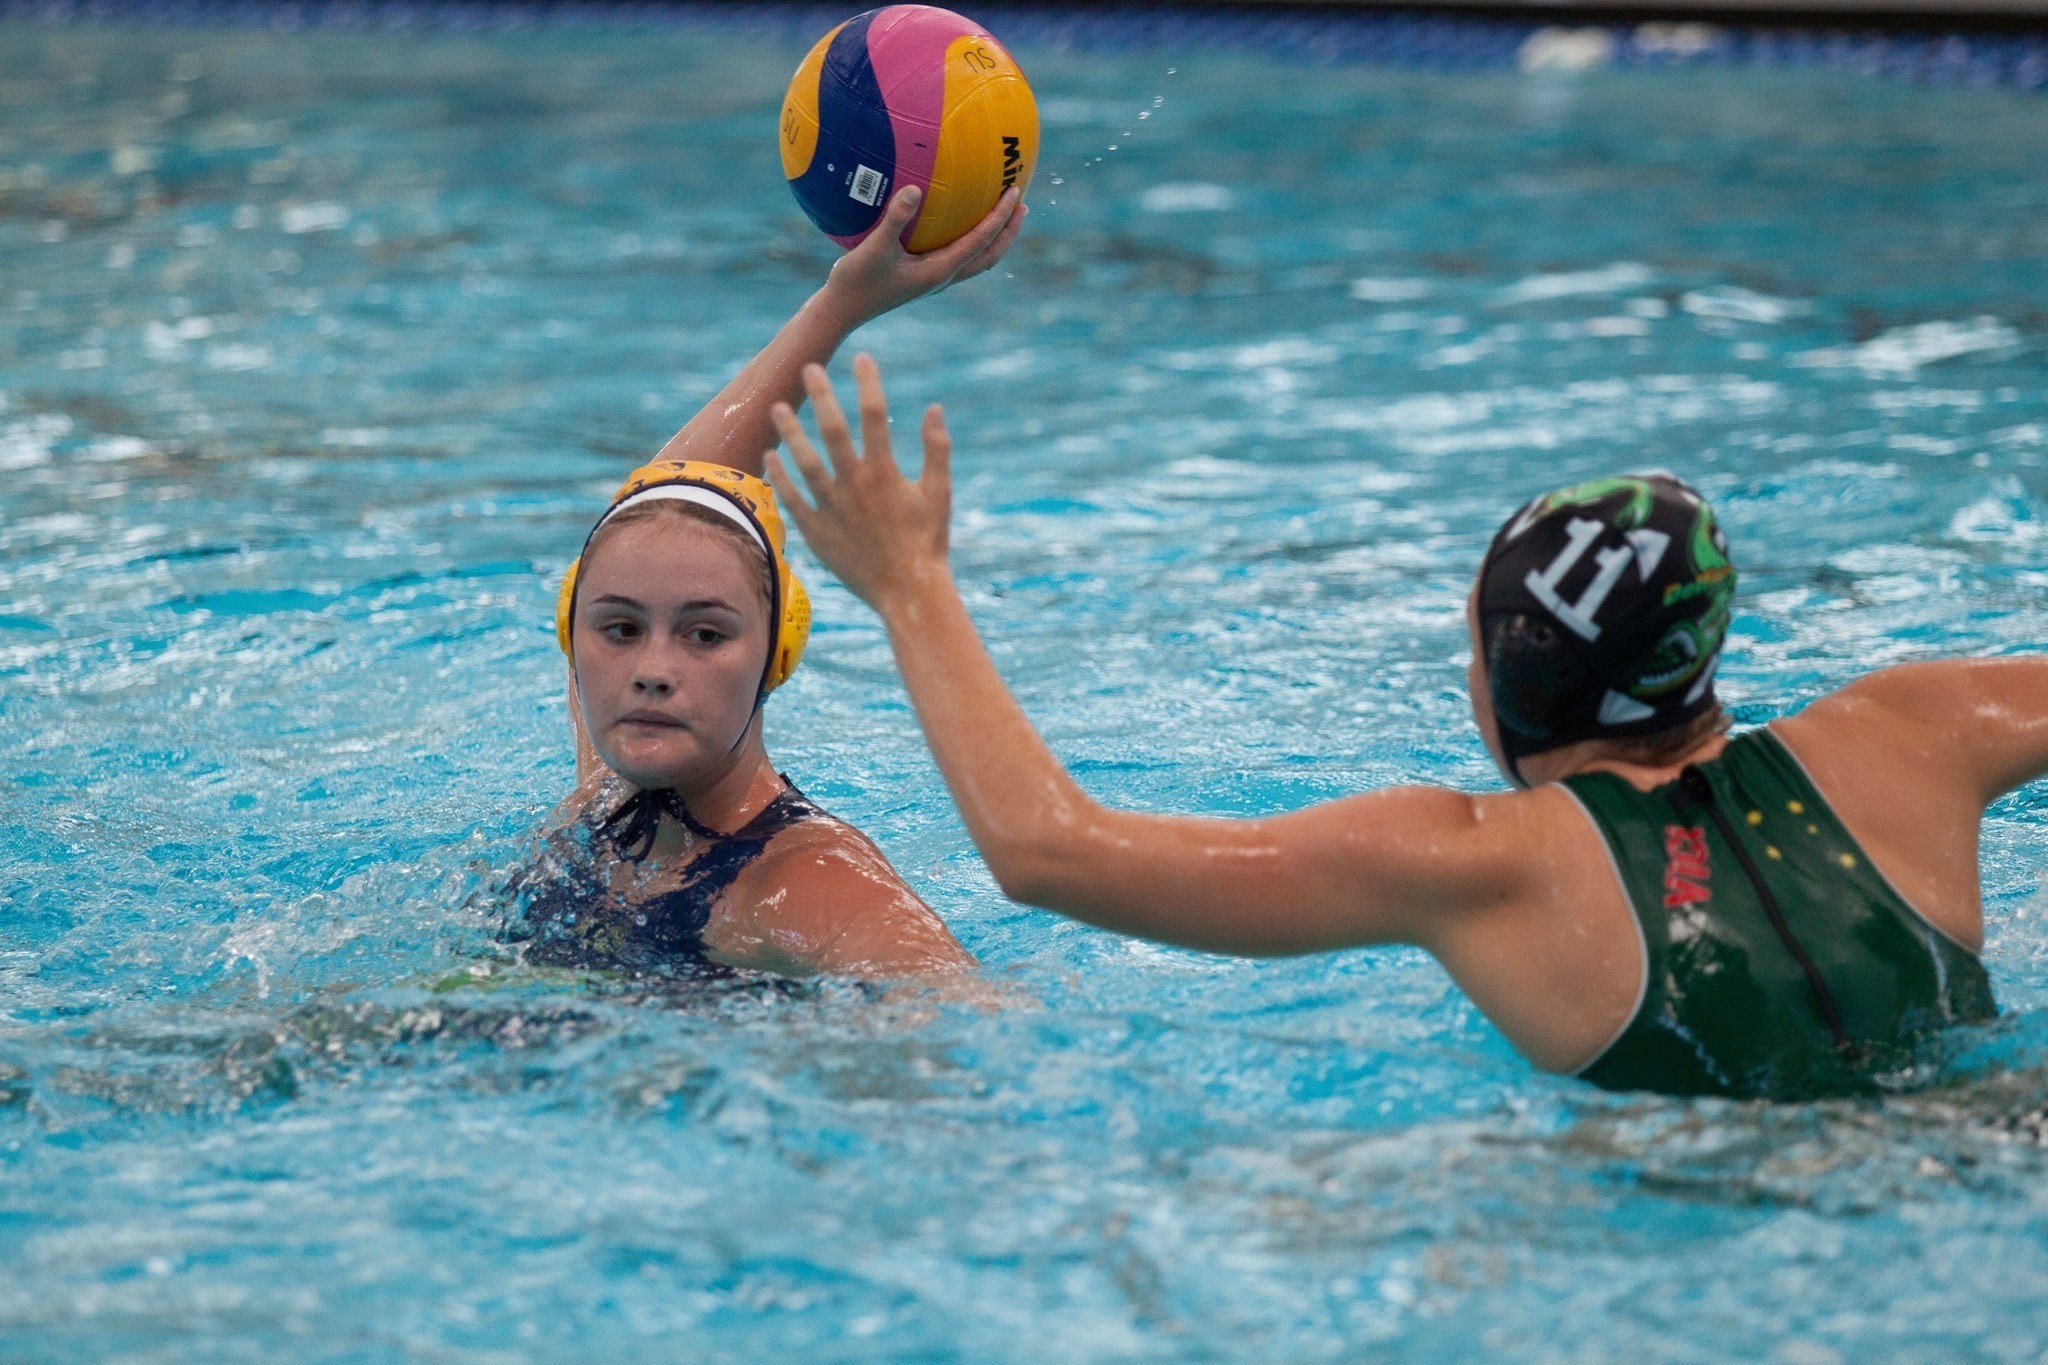 2048x1365 Mia Willows (fr 2016) is a talented water polo player, achieving impressive  results in the pool. She is representing our country in Greece in September.